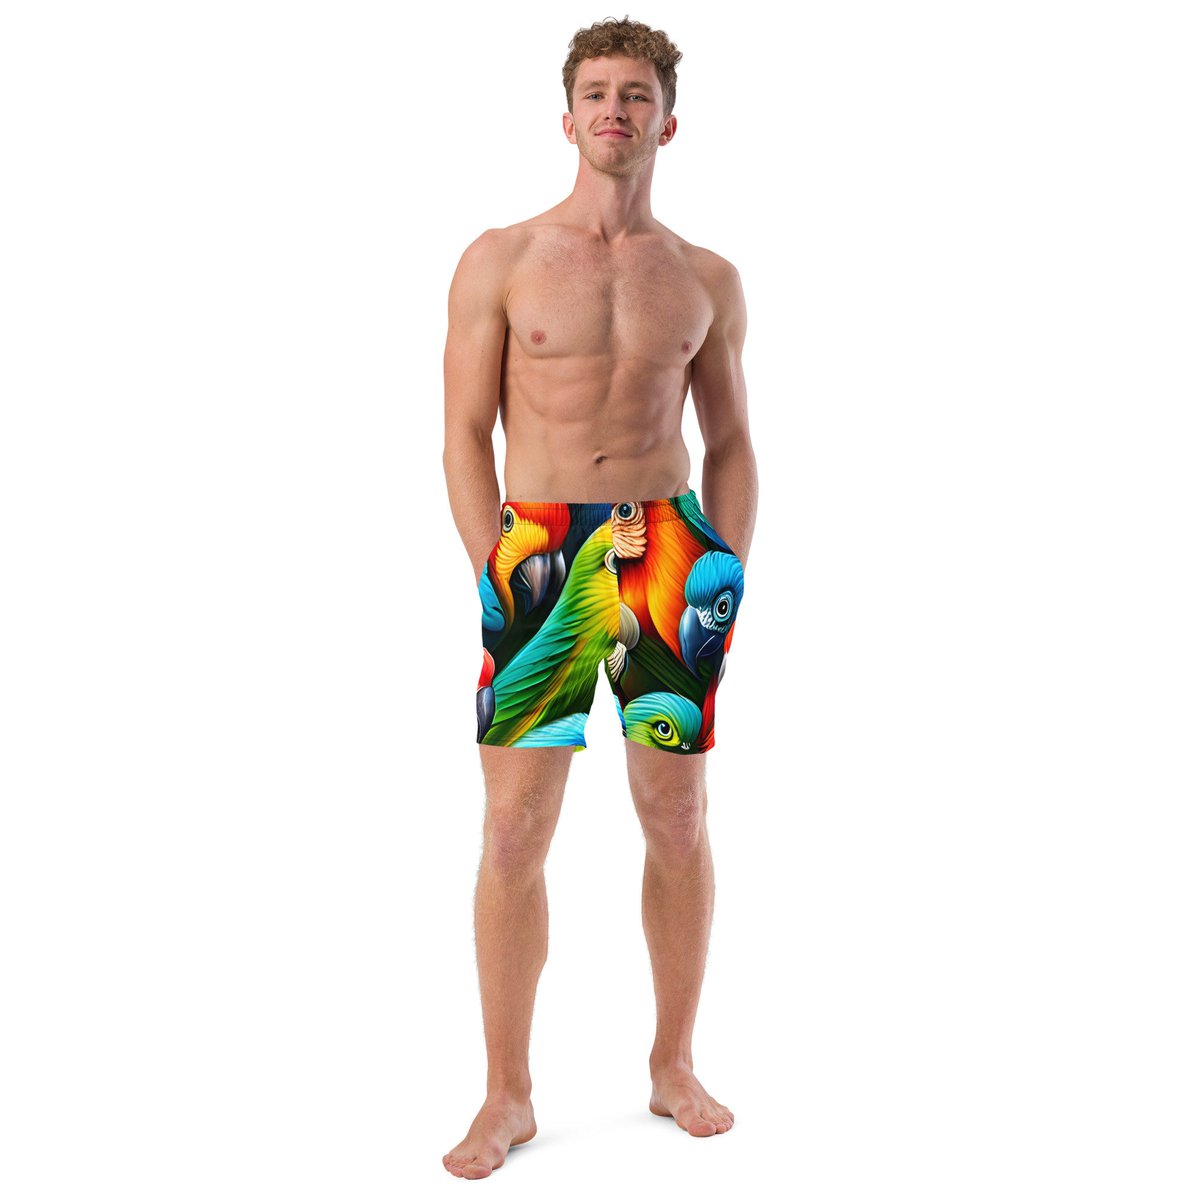 Excited to share the latest addition 
to my #etsy shop: Men's swim trunks etsy.me/3pg0eZi #swimtrunks #mensboardshorts #boardshorts #mensbathingsuits #derbsterapparel We have over 200 men's a women's swim trunks/suits 

etsy.com/shop/DerbsterA…